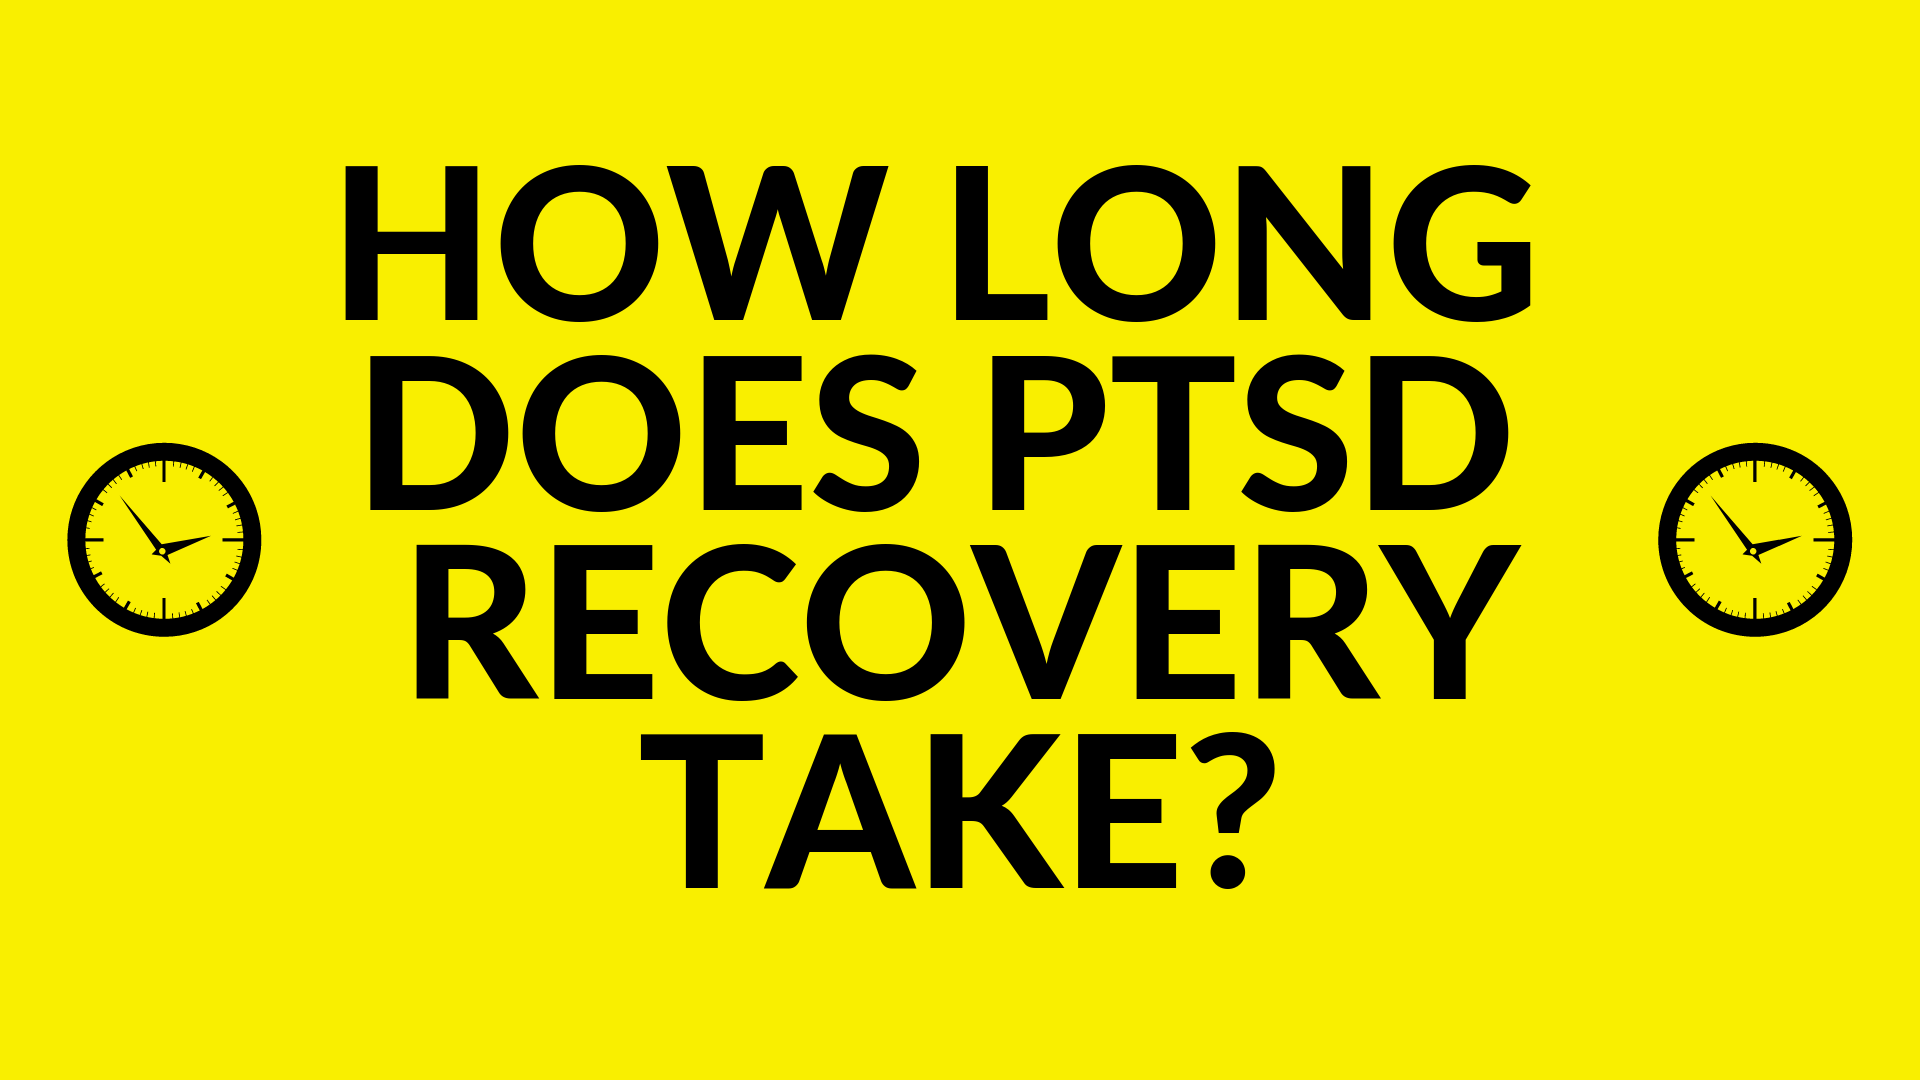 How Long Does PTSD Recovery Take?